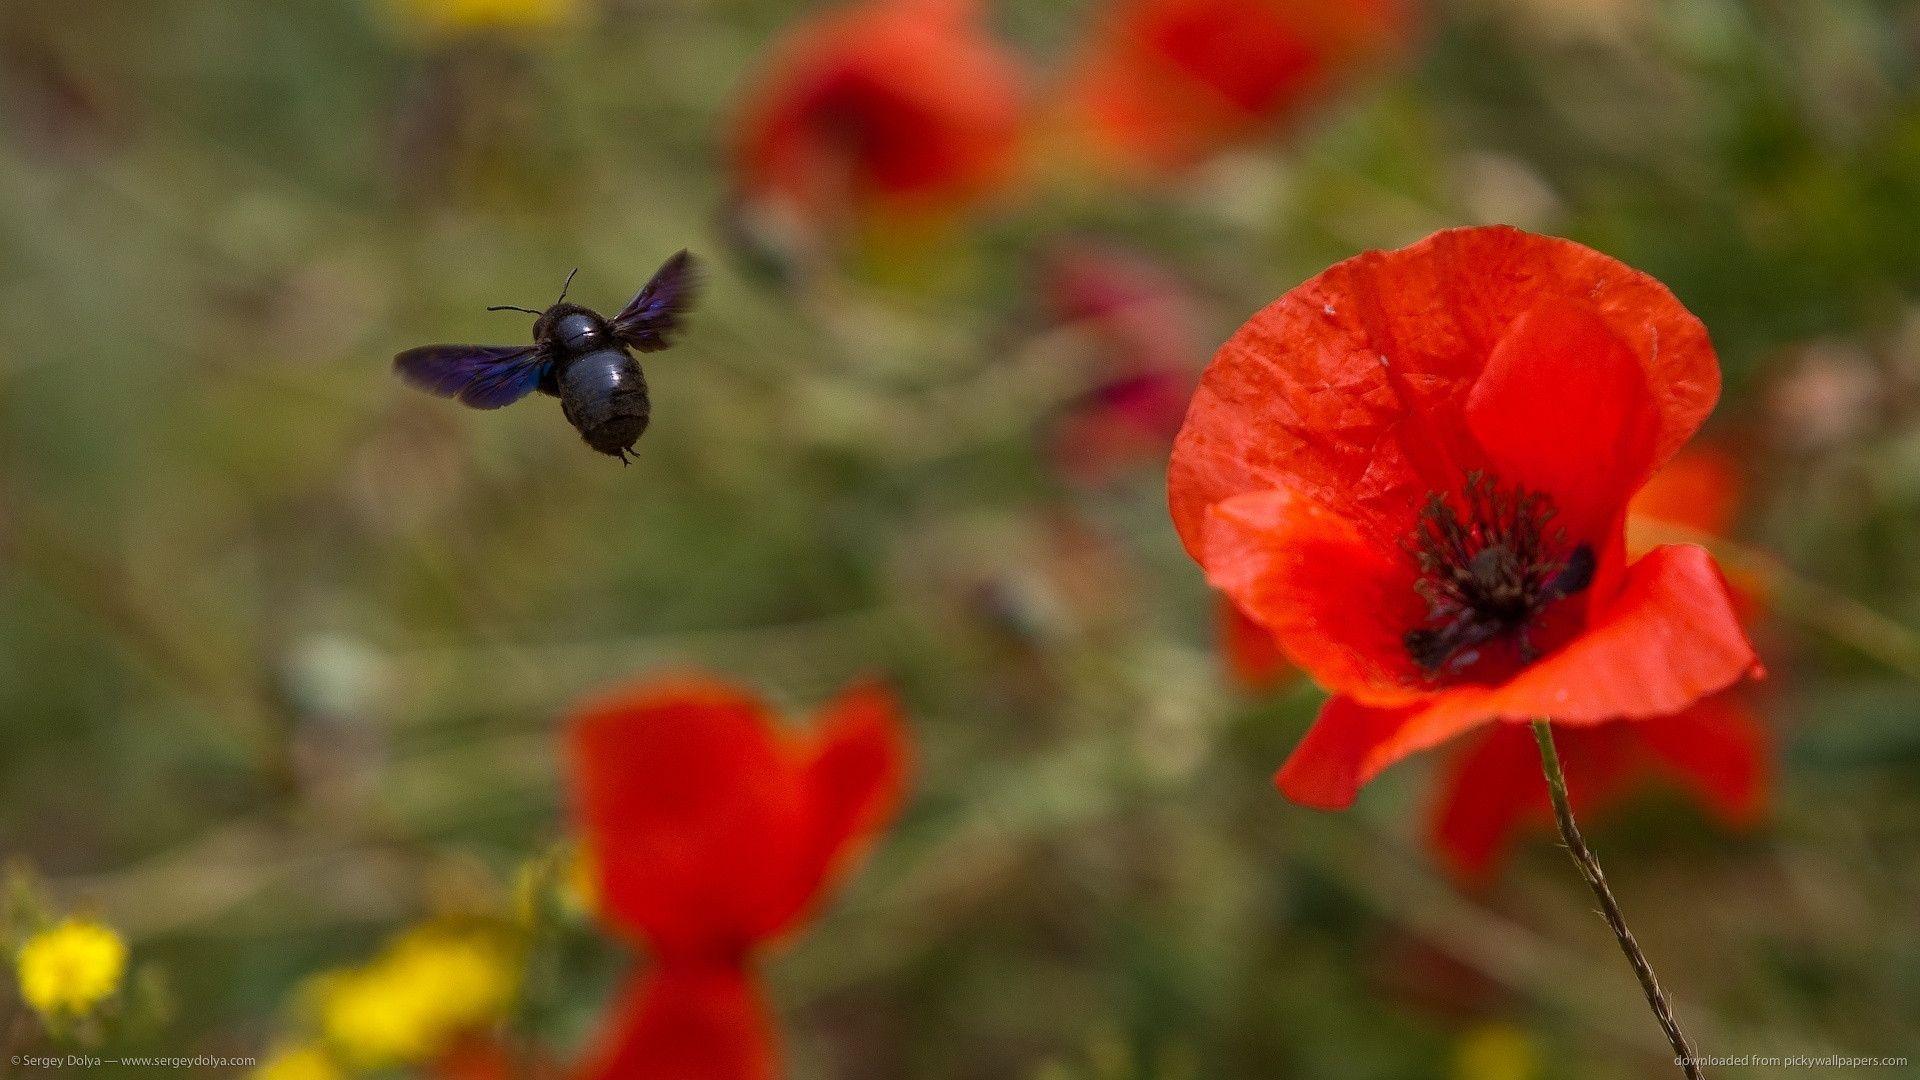 Download 1920x1080 Bug And Red Poppy Wallpaper